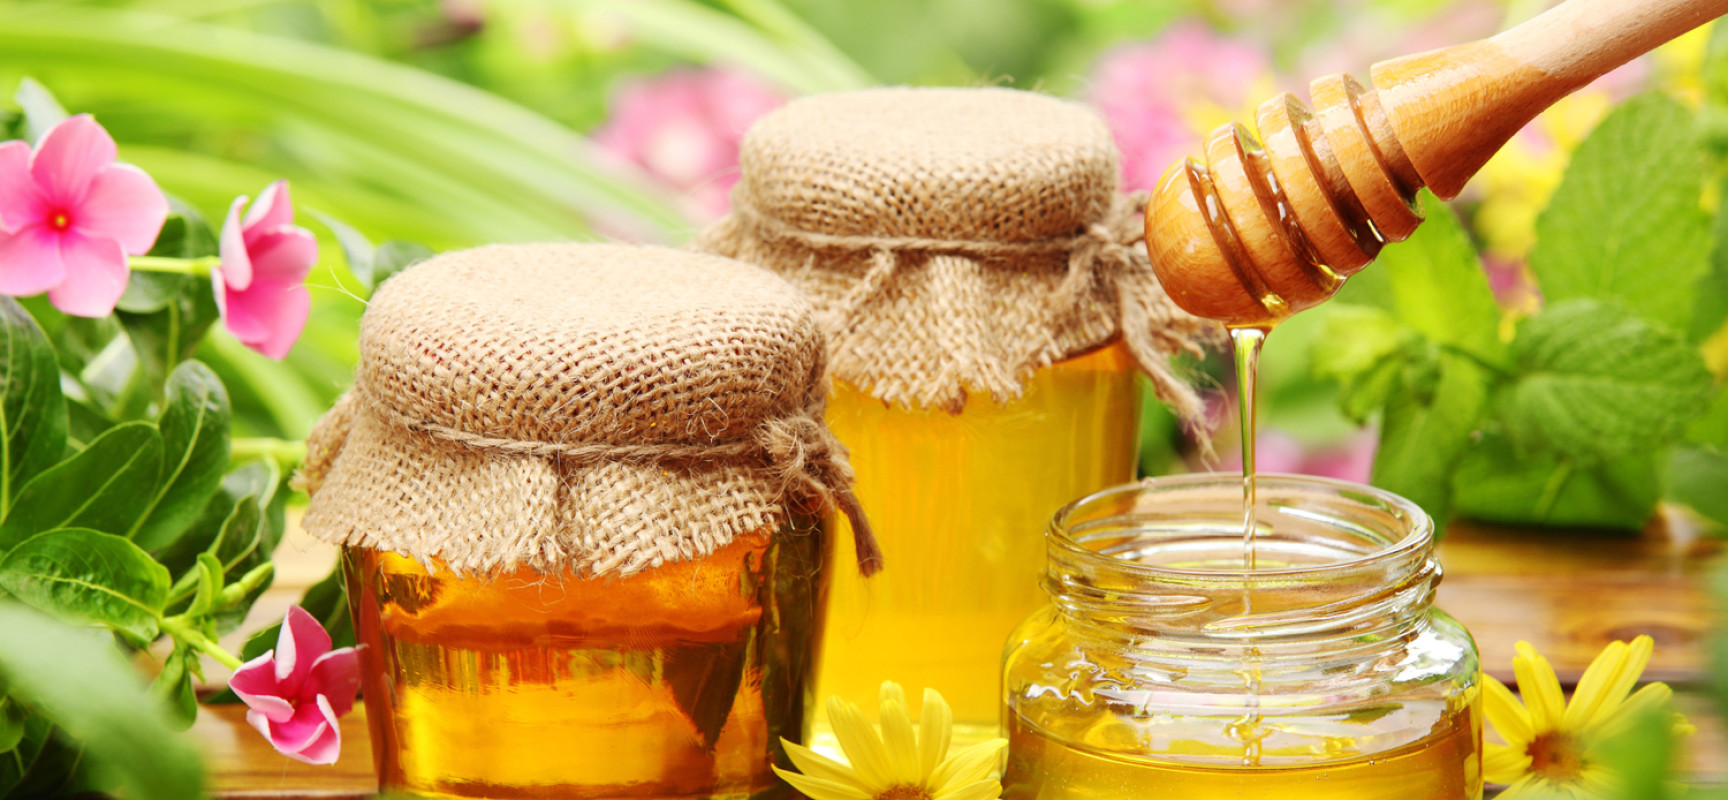 Fun facts about honey – the wonders it can do!